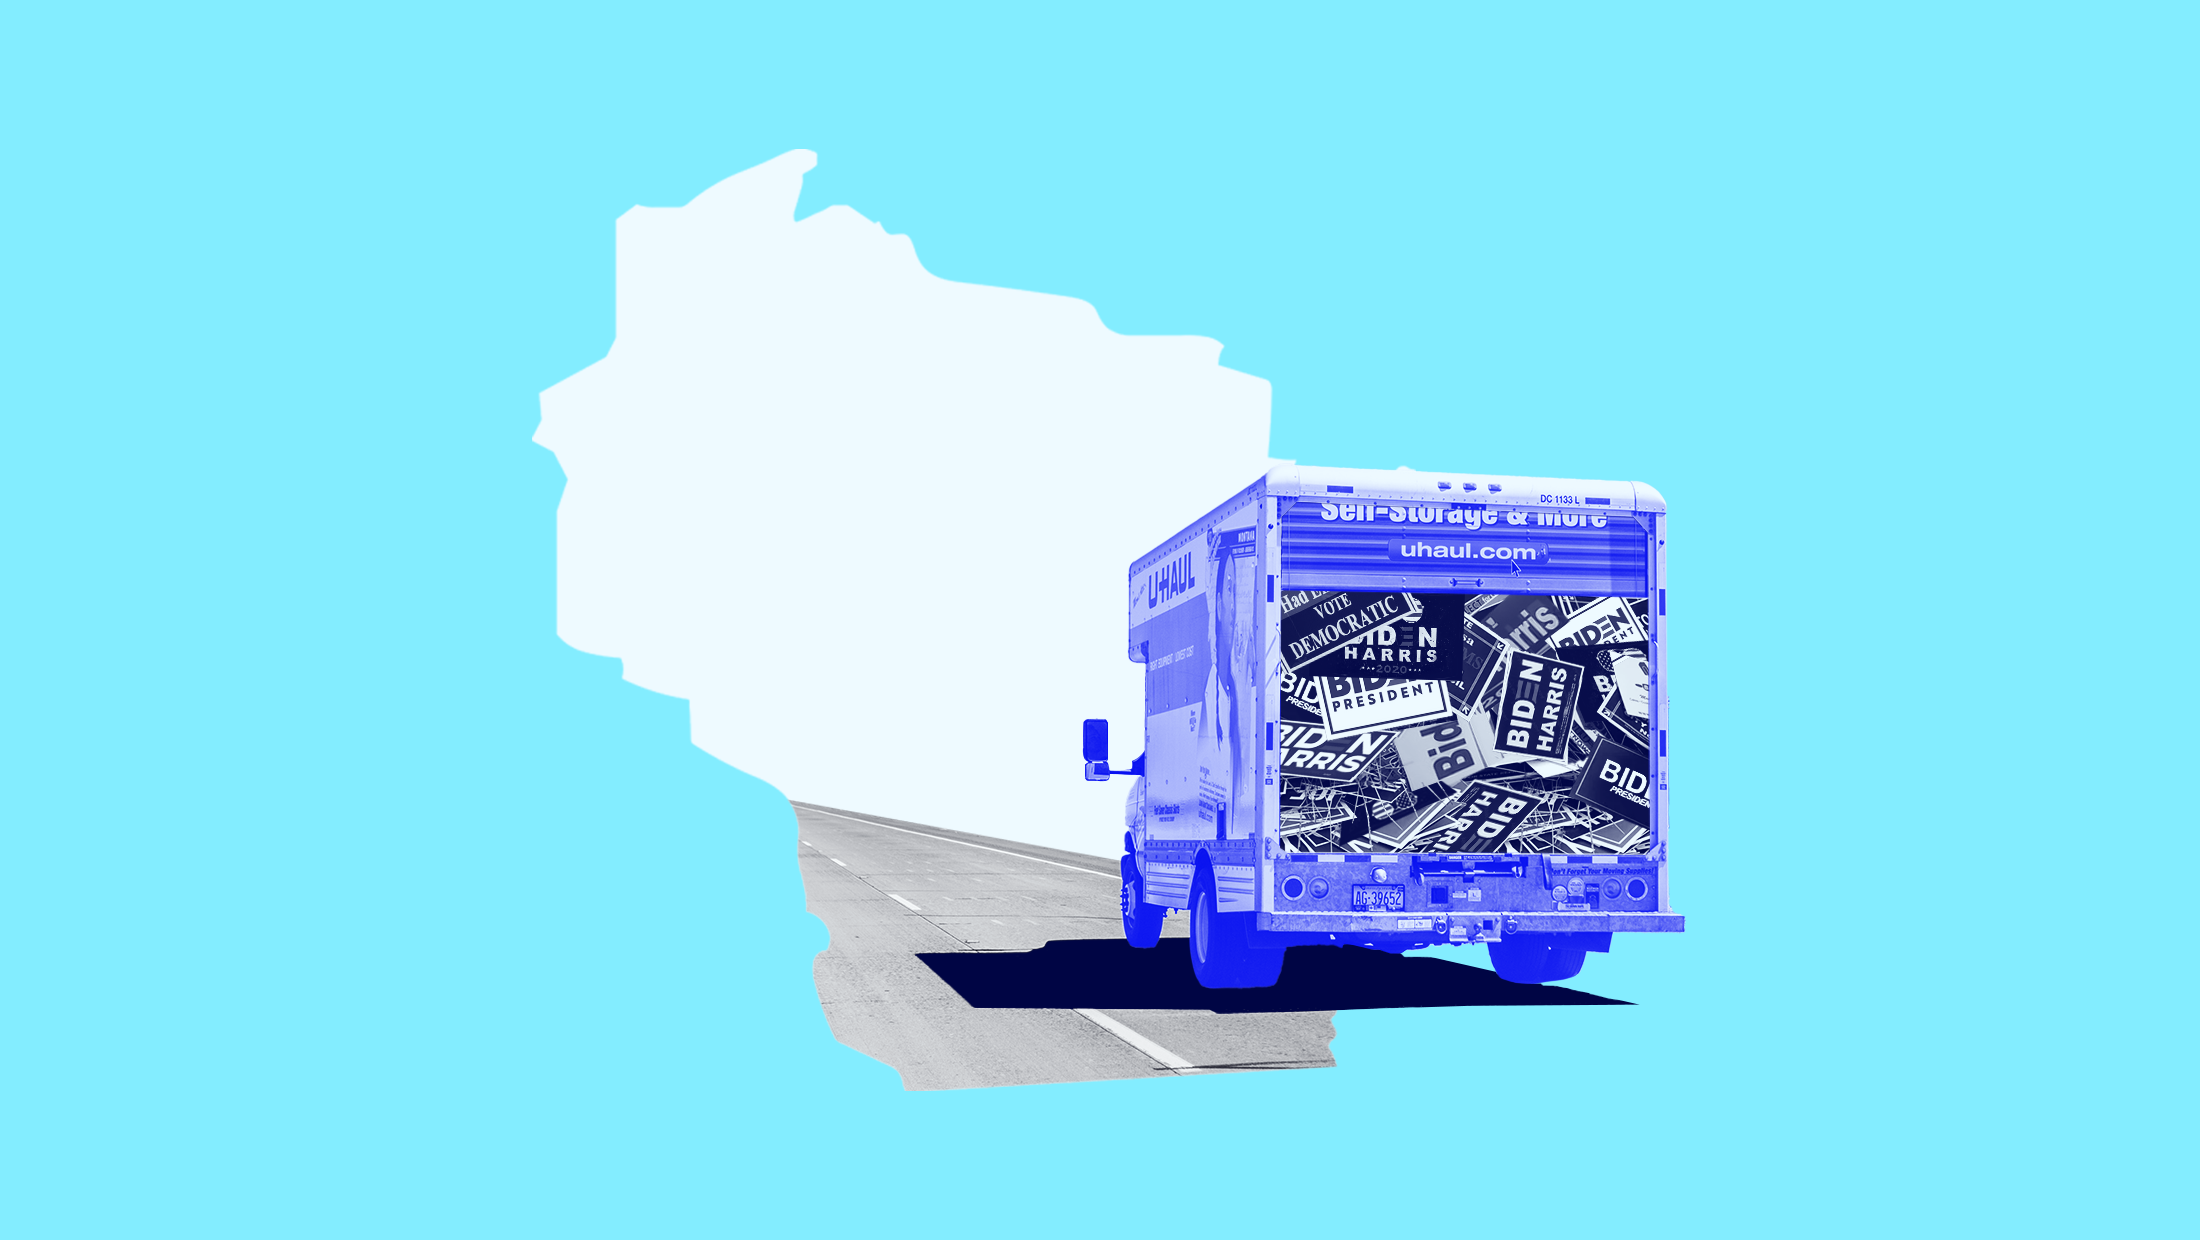 Light blue background with white shape of the state of Wisconsin and a blue-toned U-Haul truck filled with 2020 Biden Harris signs.